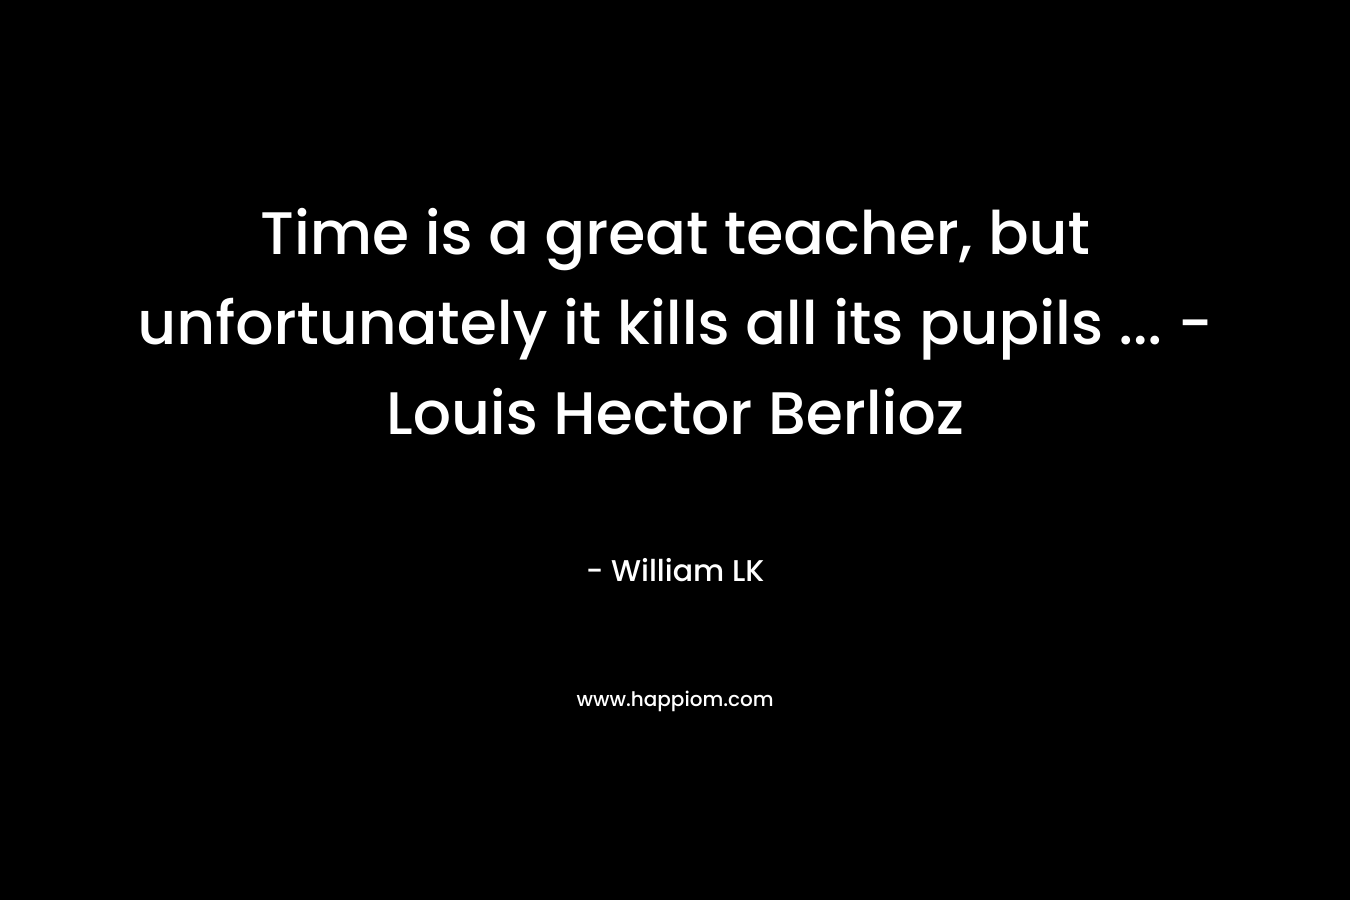 Time is a great teacher, but unfortunately it kills all its pupils ... - Louis Hector Berlioz